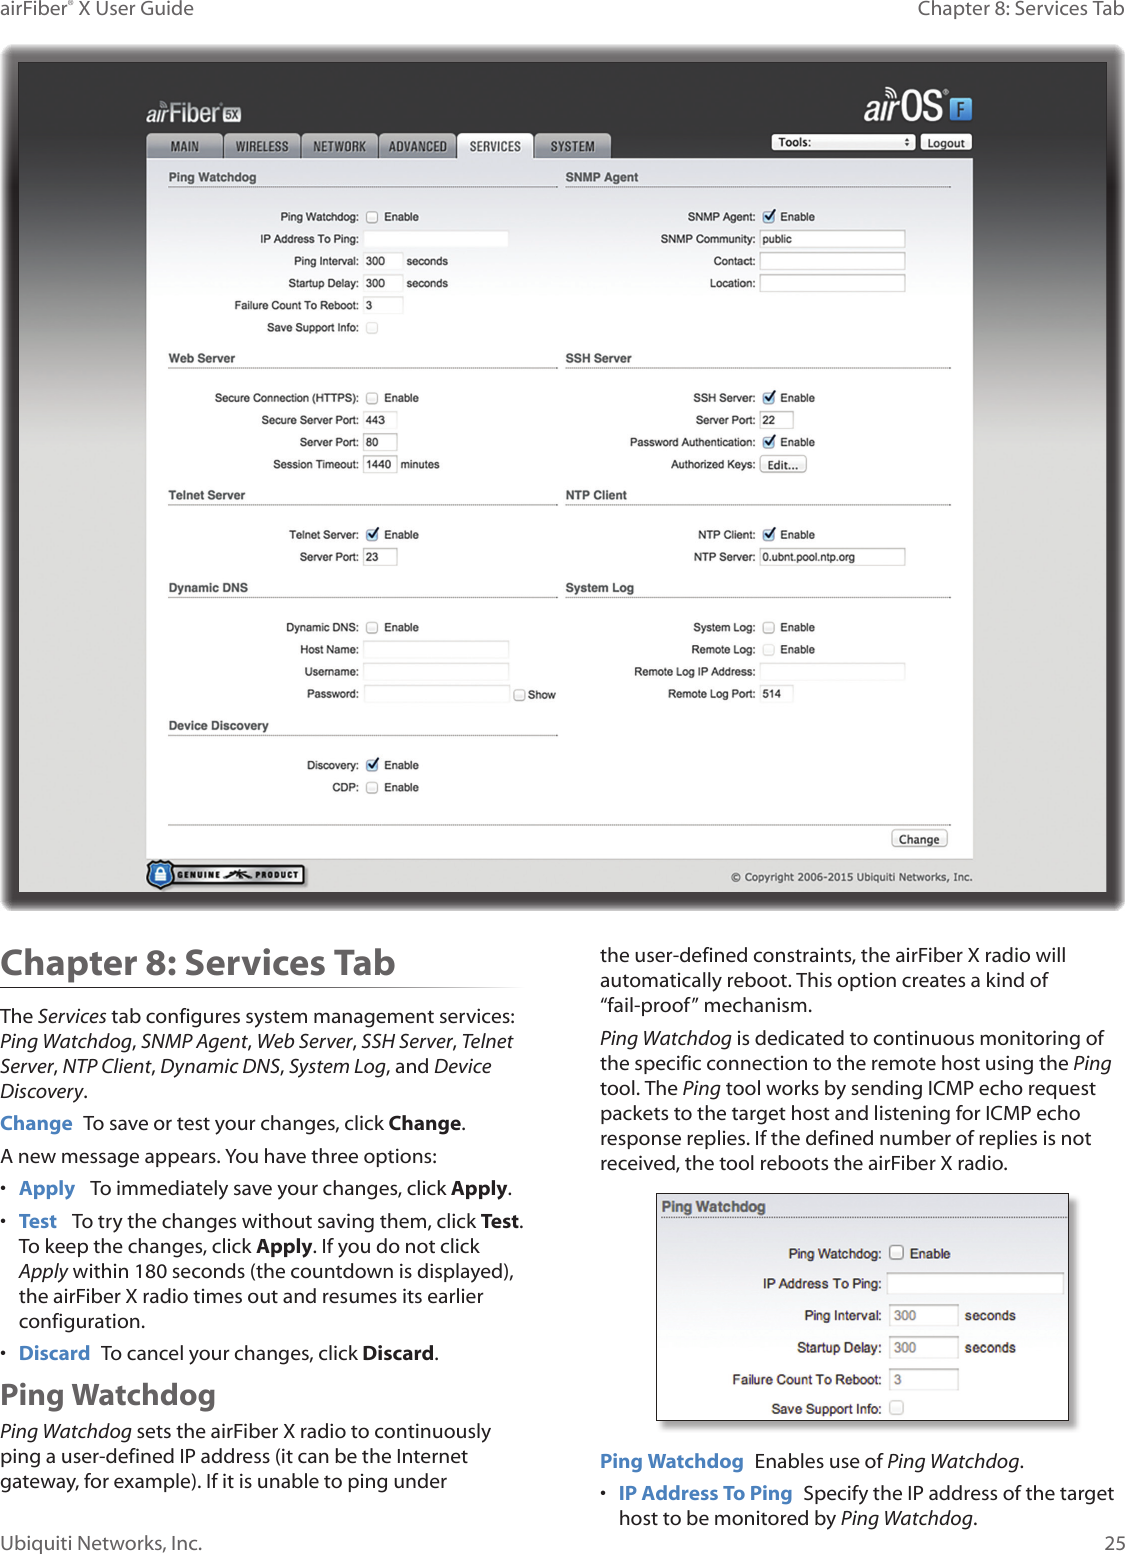 25Chapter 8: Services TabairFiber® X User GuideUbiquiti Networks, Inc.Chapter 8: Services TabThe Services tab configures system management services: Ping Watchdog, SNMP Agent, Web Server, SSH Server, Telnet Server, NTP Client, Dynamic DNS, System Log, and Device Discovery.Change  To save or test your changes, click Change.A new message appears. You have three options:•  Apply   To immediately save your changes, click Apply.•  Test   To try the changes without saving them, click Test. To keep the changes, click Apply. If you do not click Apply within 180 seconds (the countdown is displayed), the airFiberX radio times out and resumes its earlier configuration.•  Discard  To cancel your changes, click Discard.Ping WatchdogPing Watchdog sets the airFiberX radio to continuously ping a user-defined IP address (it can be the Internet gateway, for example). If it is unable to ping under the user-defined constraints, the airFiberX radio will automatically reboot. This option creates a kind of “fail-proof” mechanism.Ping Watchdog is dedicated to continuous monitoring of the specific connection to the remote host using the Ping tool. The Ping tool works by sending ICMP echo request packets to the target host and listening for ICMP echo response replies. If the defined number of replies is not received, the tool reboots the airFiberX radio.Ping Watchdog  Enables use of Ping Watchdog.•  IP Address To Ping  Specify the IP address of the target host to be monitored by Ping Watchdog.